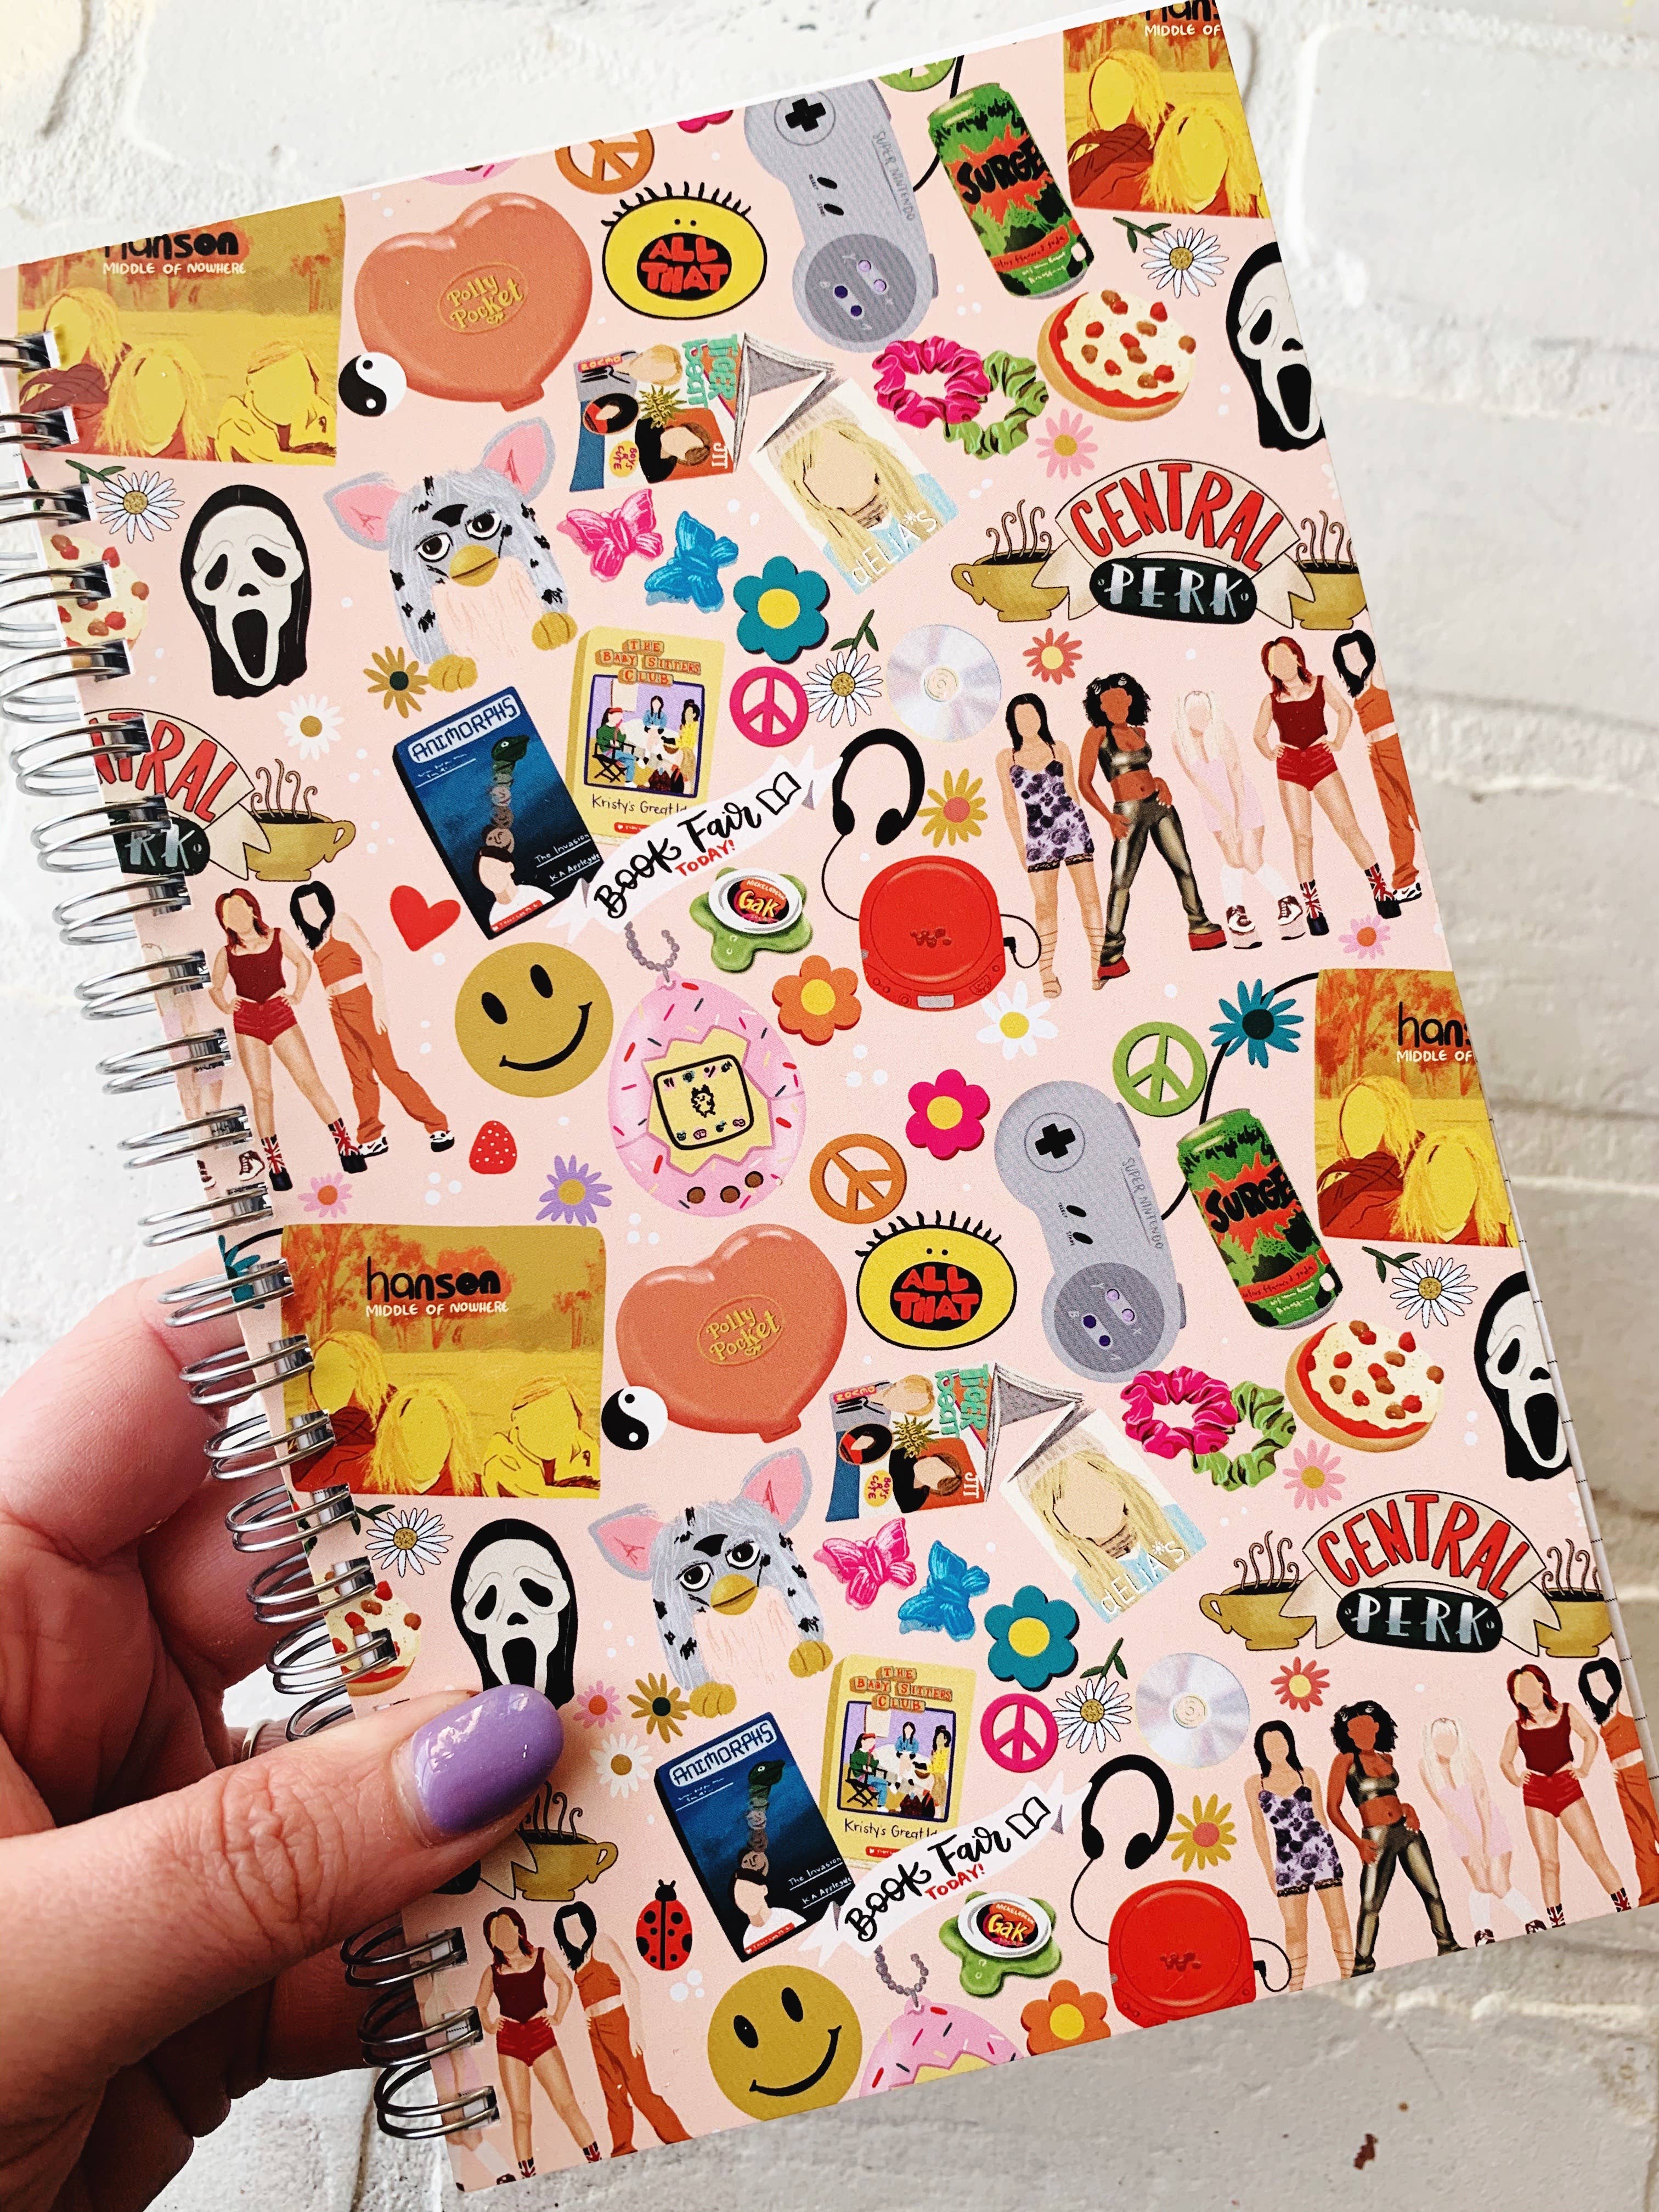 Nineties Icons Spiral Notebook